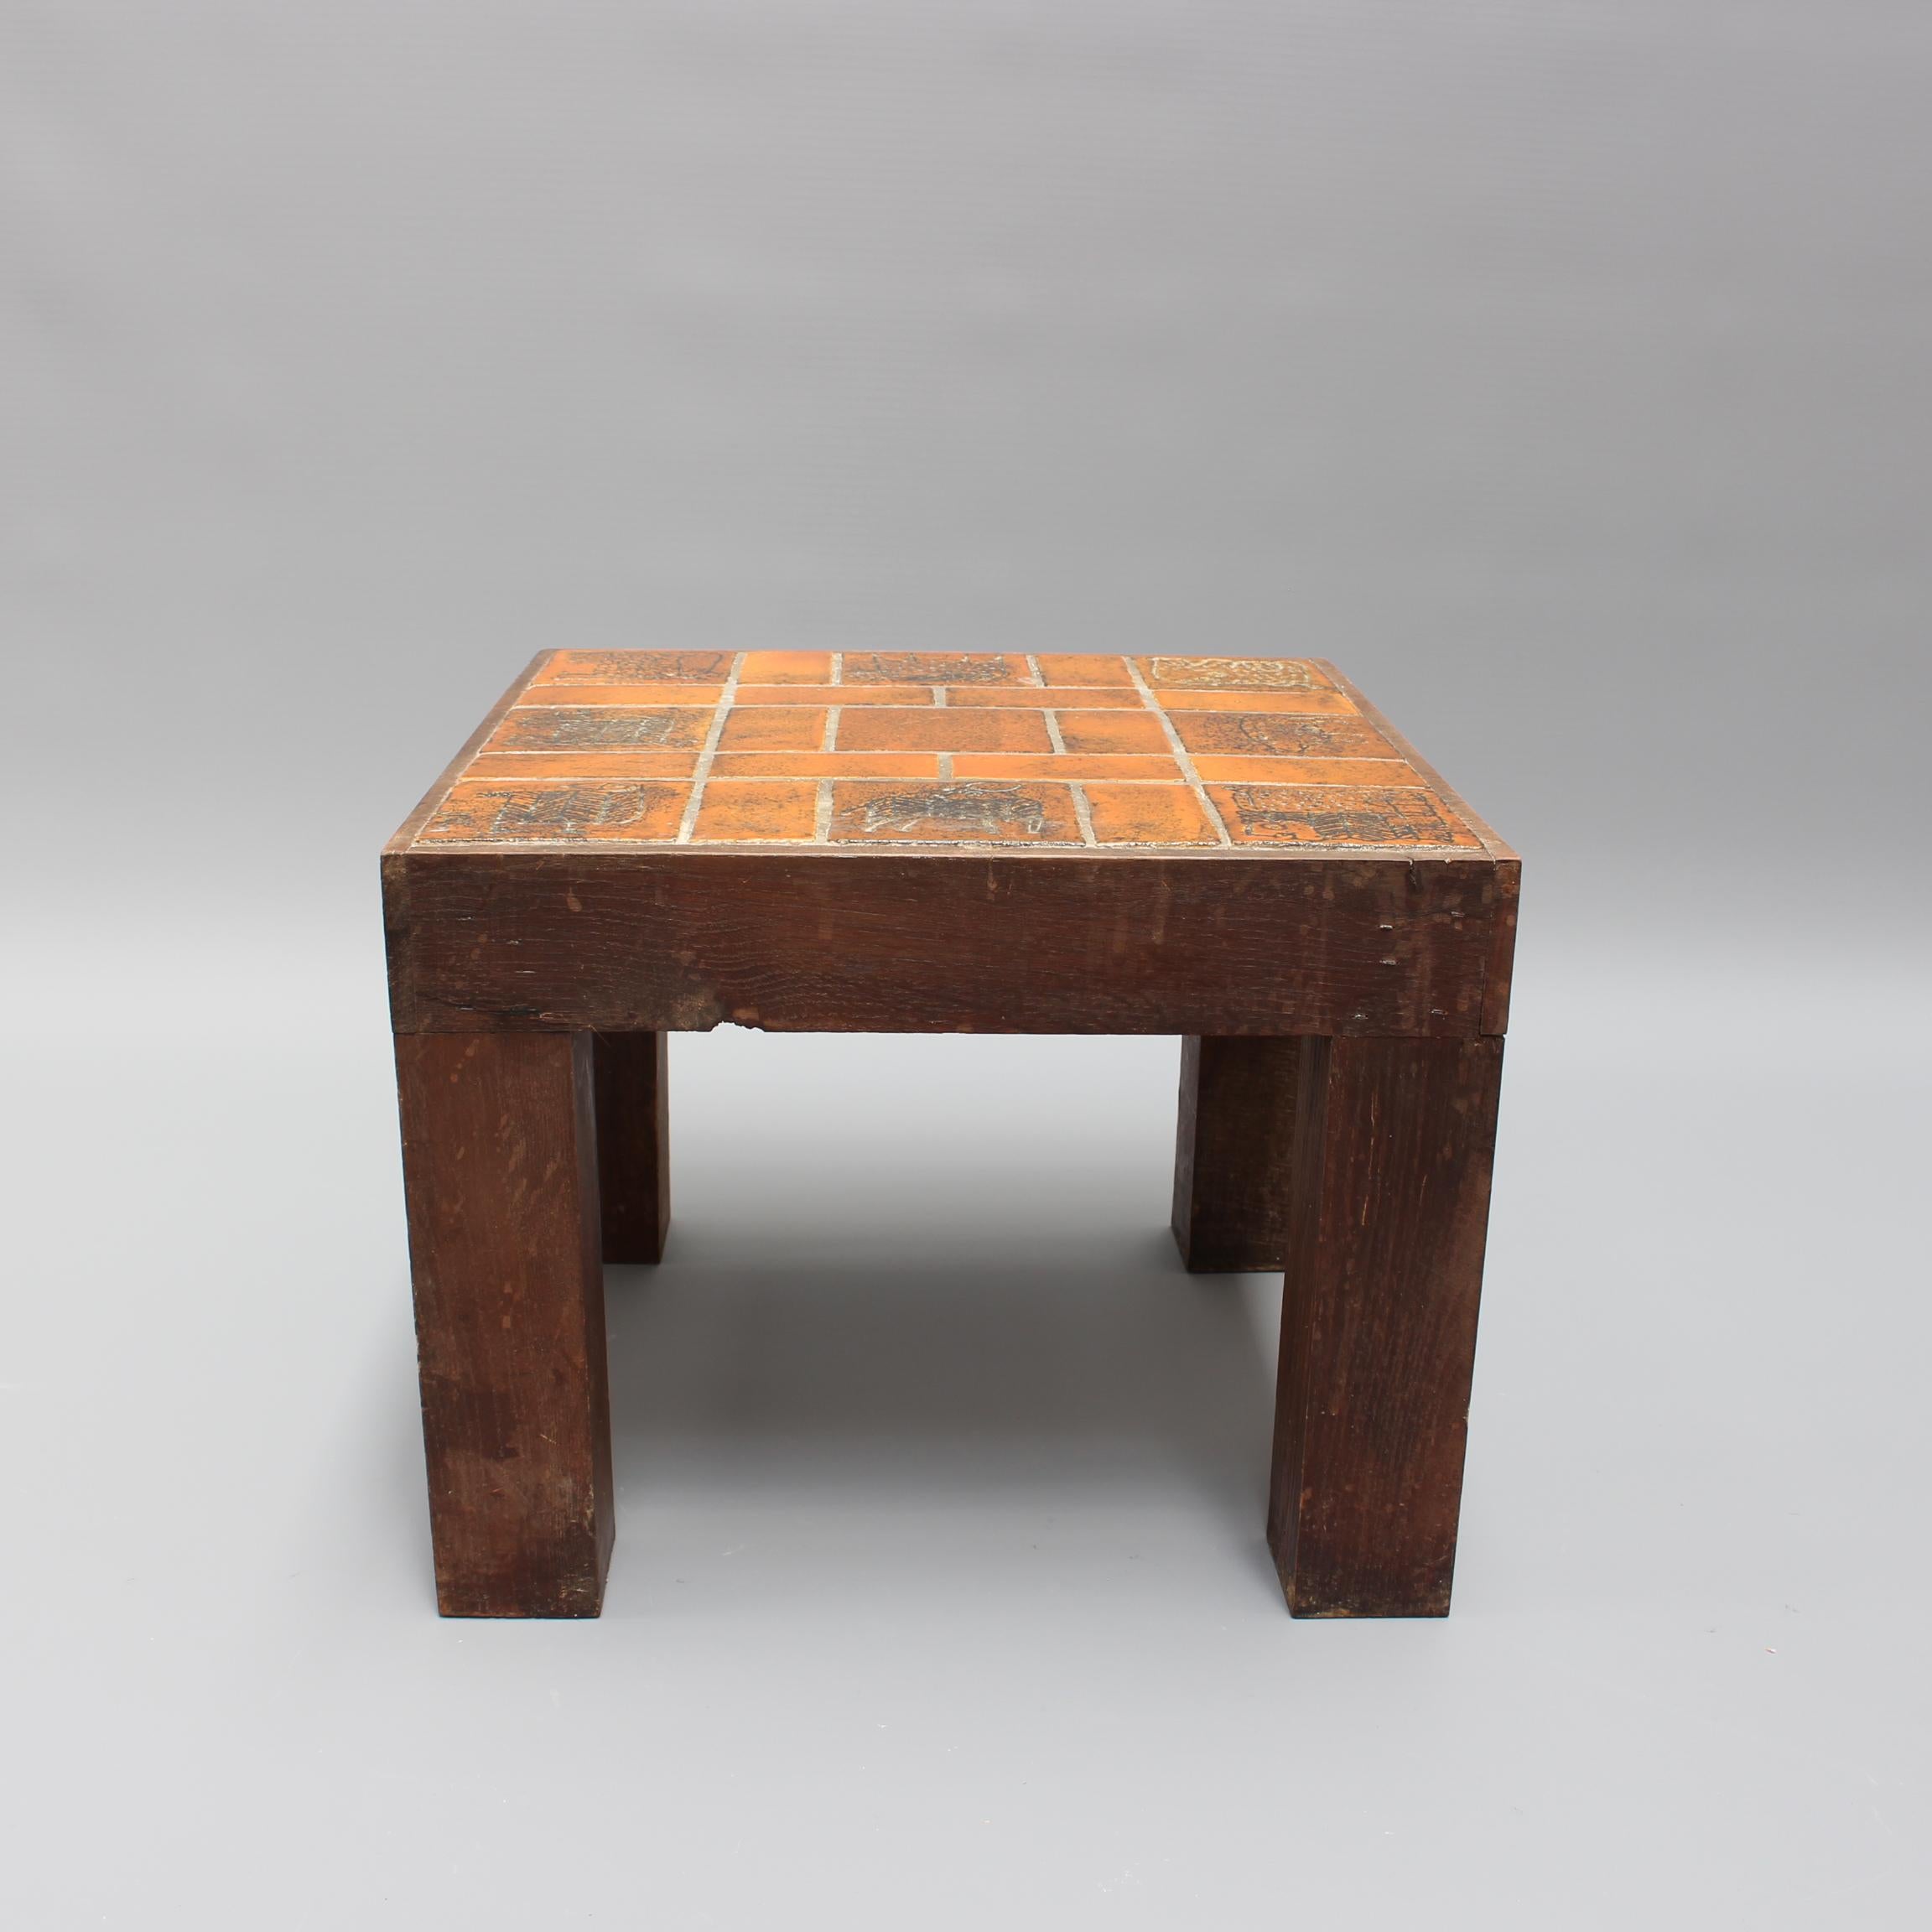 Vintage French Square Side Table with Ceramic Tile Top by Jacques Blin, c. 1950s For Sale 1